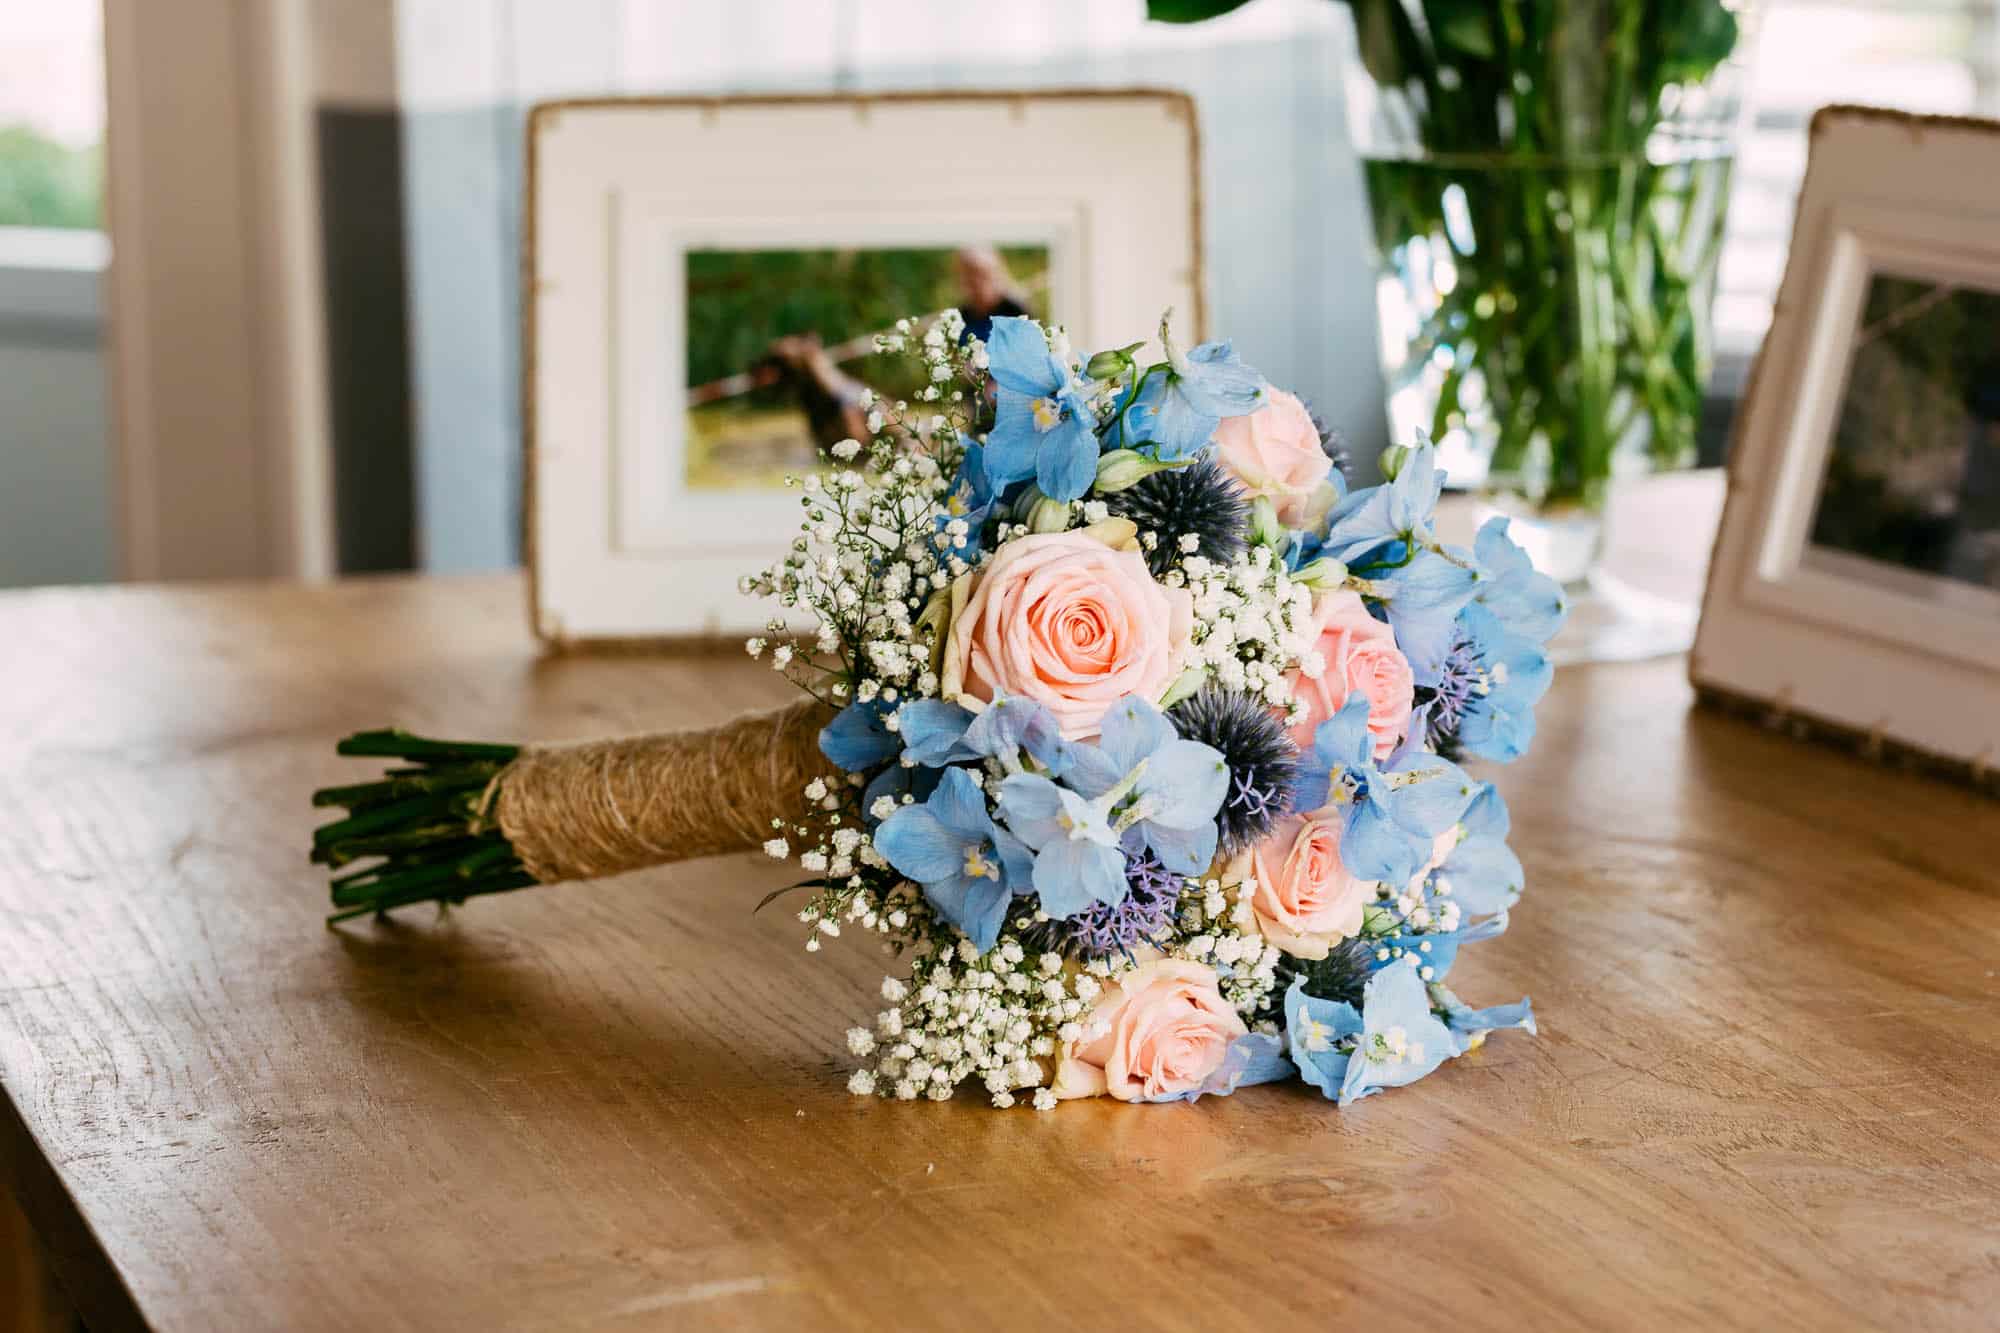 On a wooden table is a wedding bouquet of blue and pink flowers.